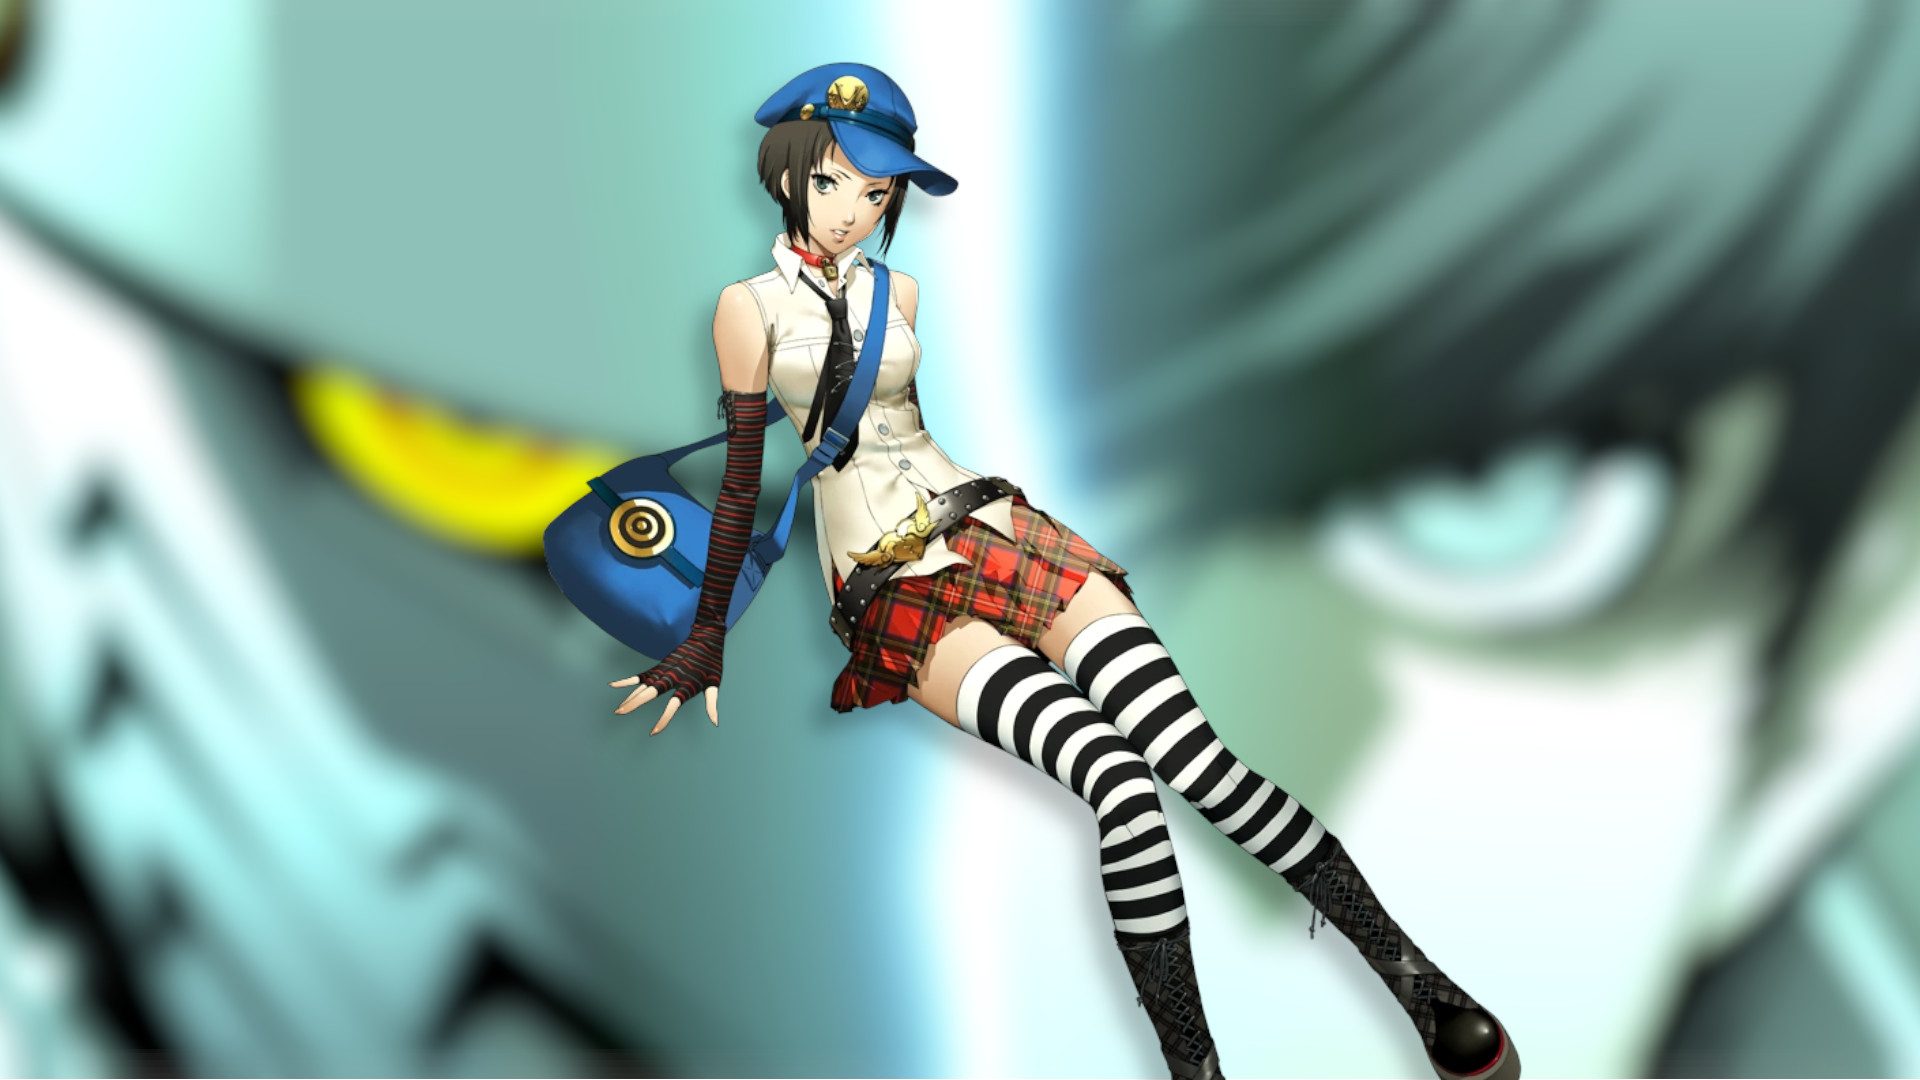 Persona 4: Marie - wide 4